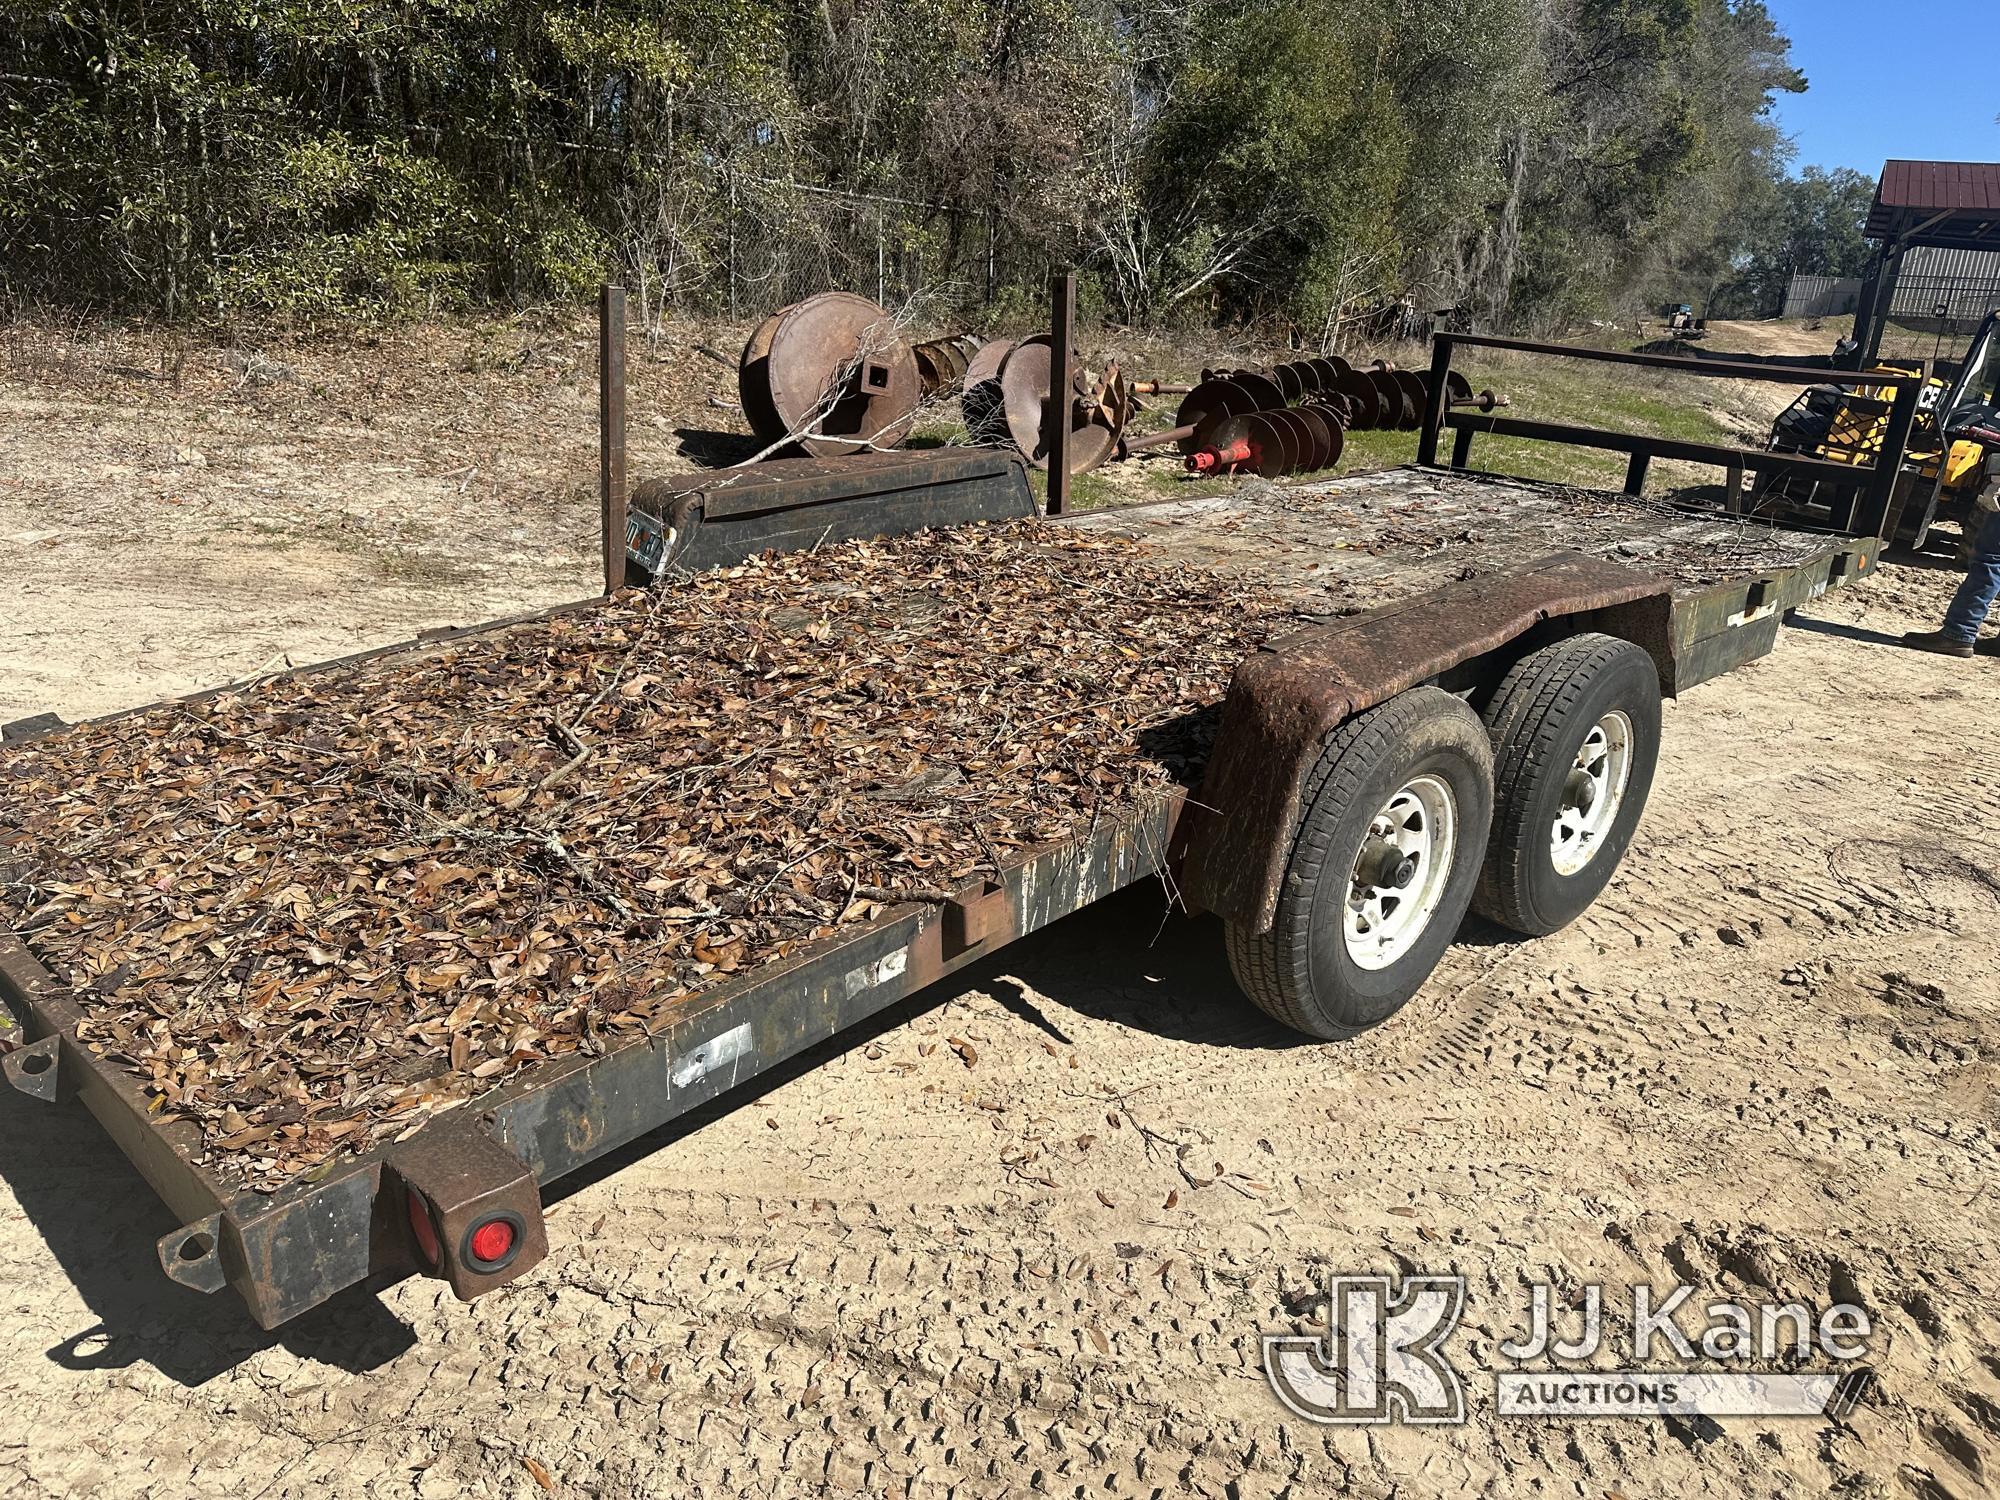 (Pensacola, FL) 2000 Anderson 10-Ton T/A Tagalong Trailer No Title) (Rust Damage, Missing Ramps